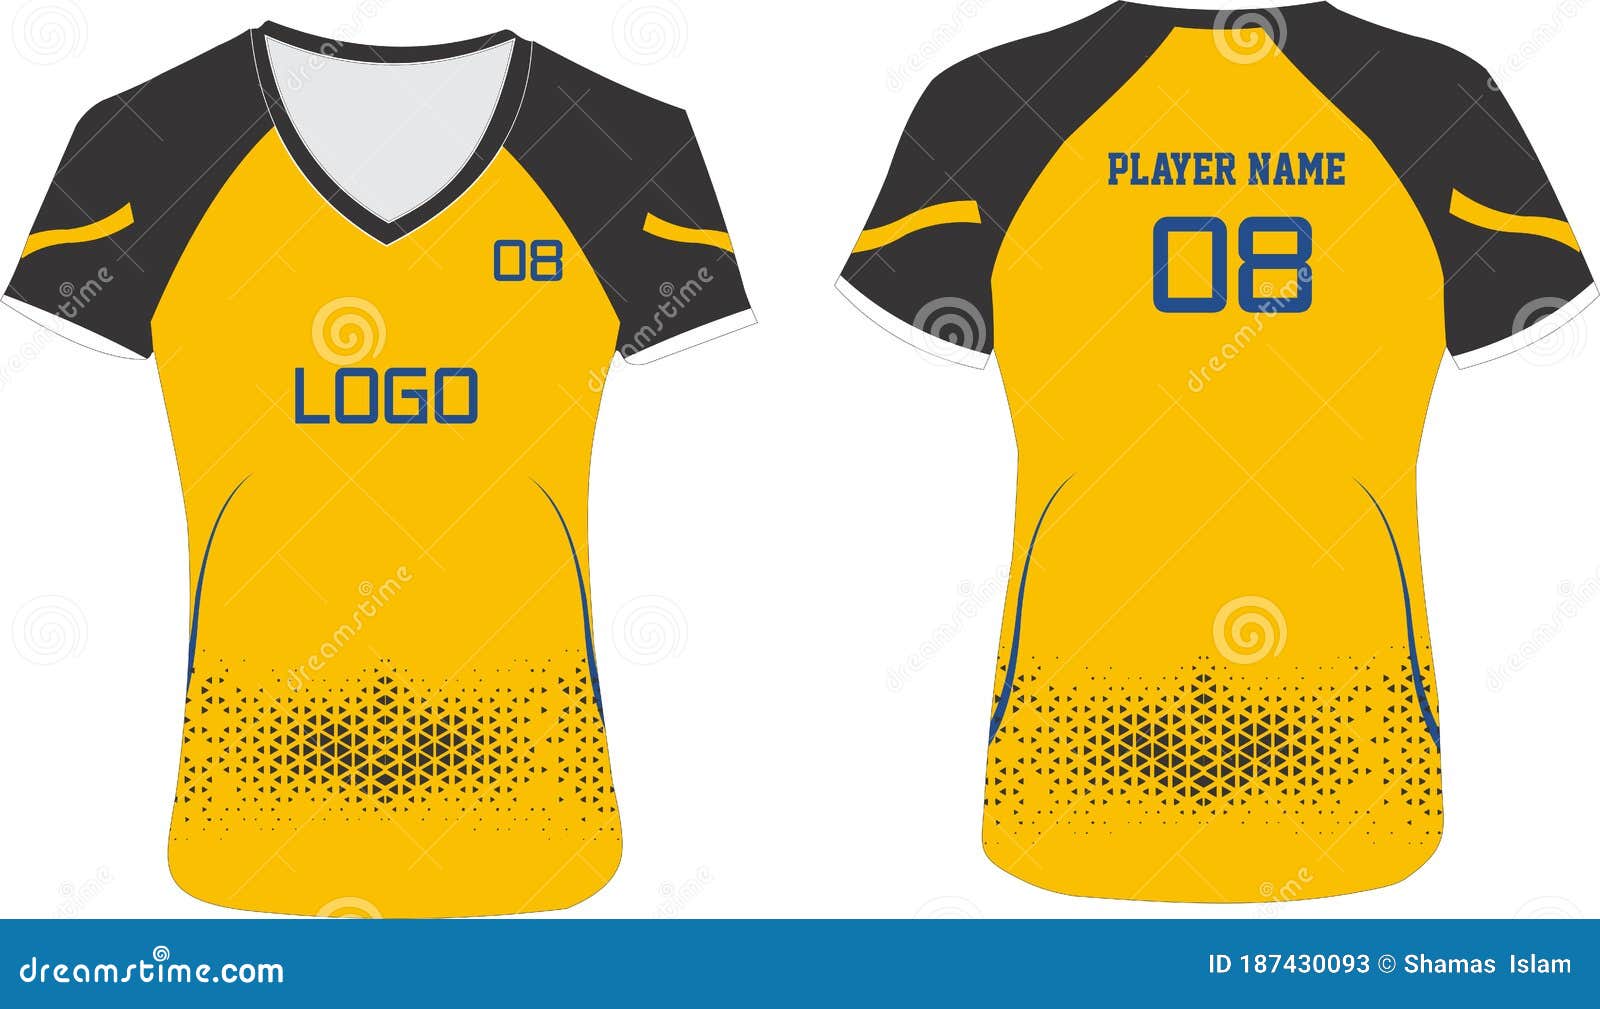 Download Women S Custom Design Sublimated Volleyball Jersey Mock Up Templates Illustrations Front And Back View Stock Vector Illustration Of Mock Custom 187430093